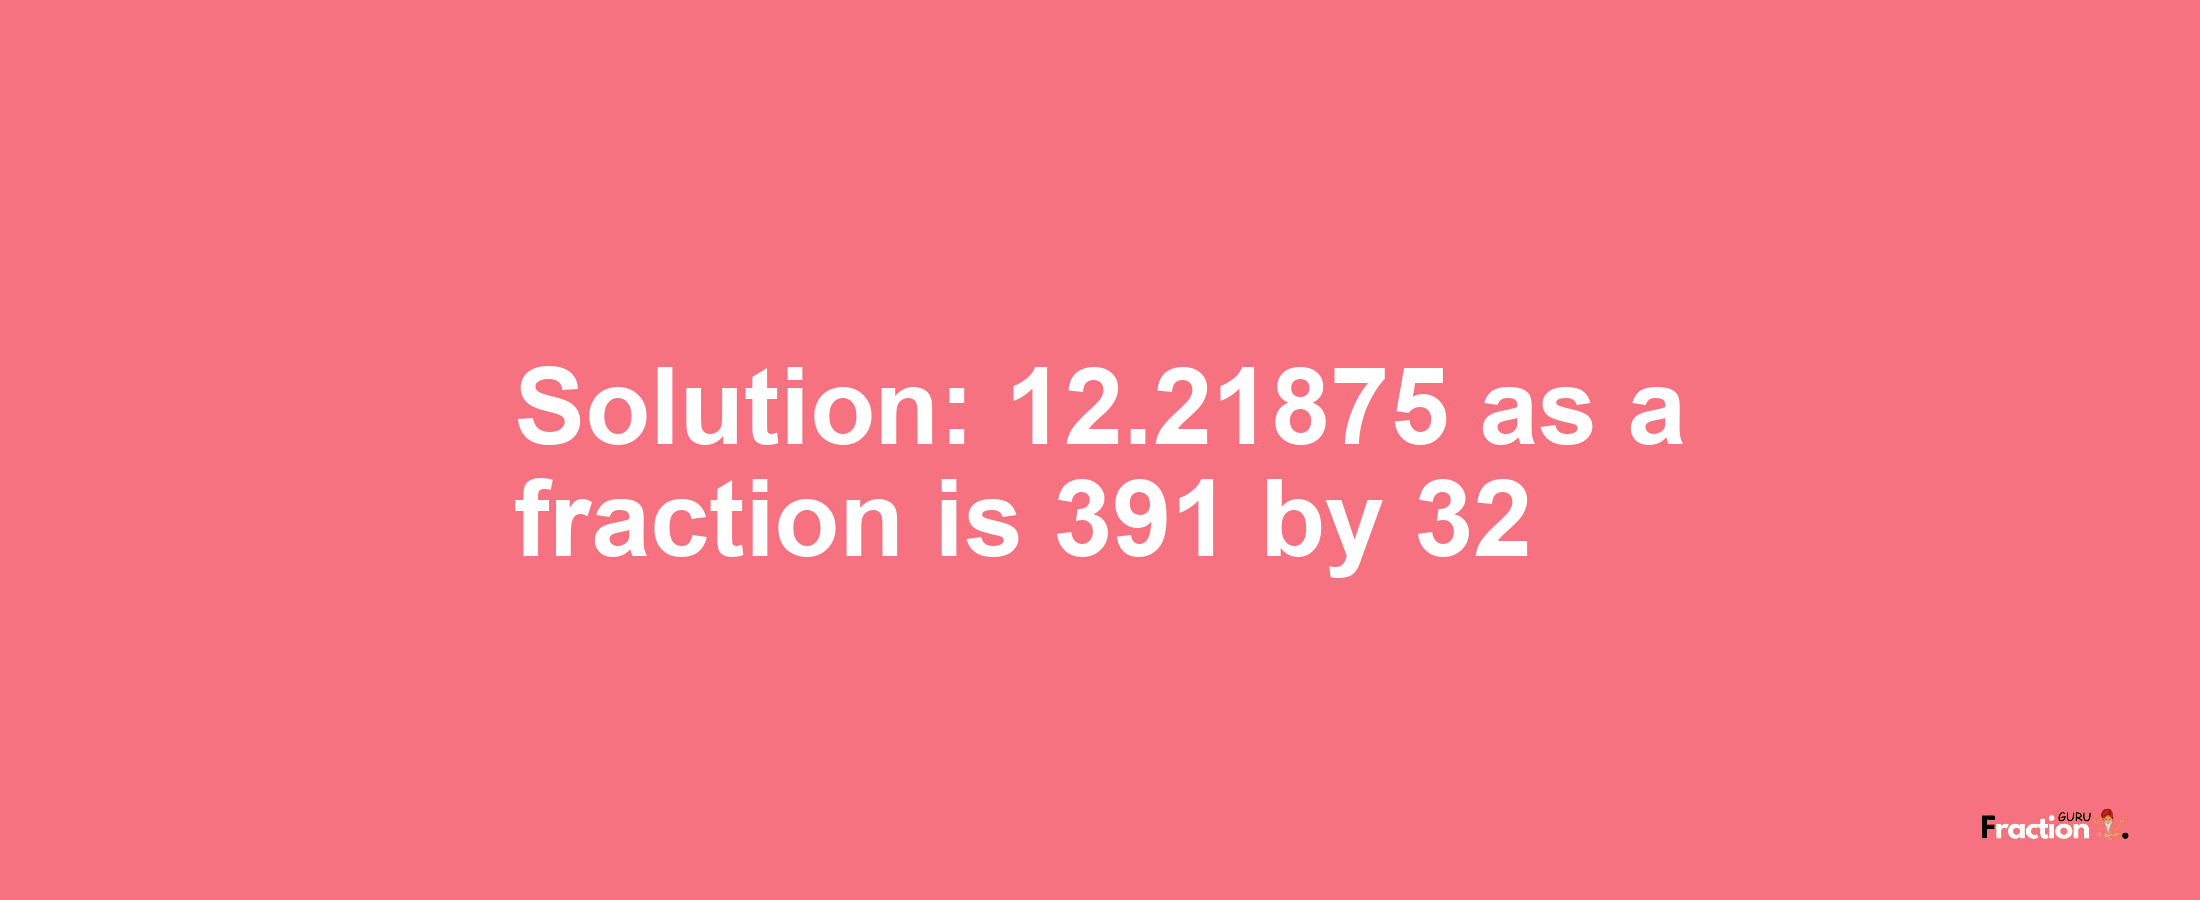 Solution:12.21875 as a fraction is 391/32